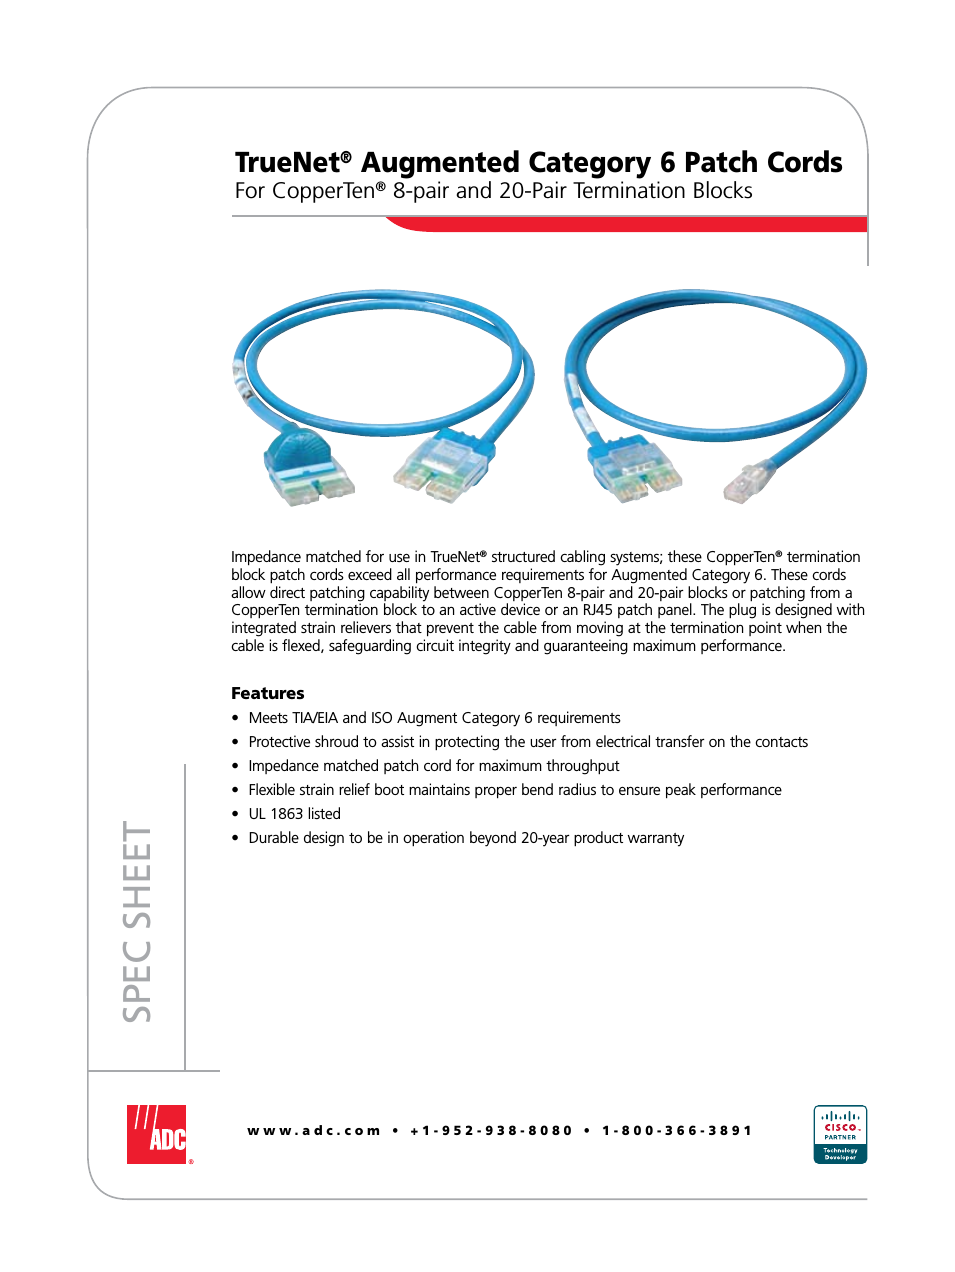 TrueNet Augmented Category 6 Patch Cords